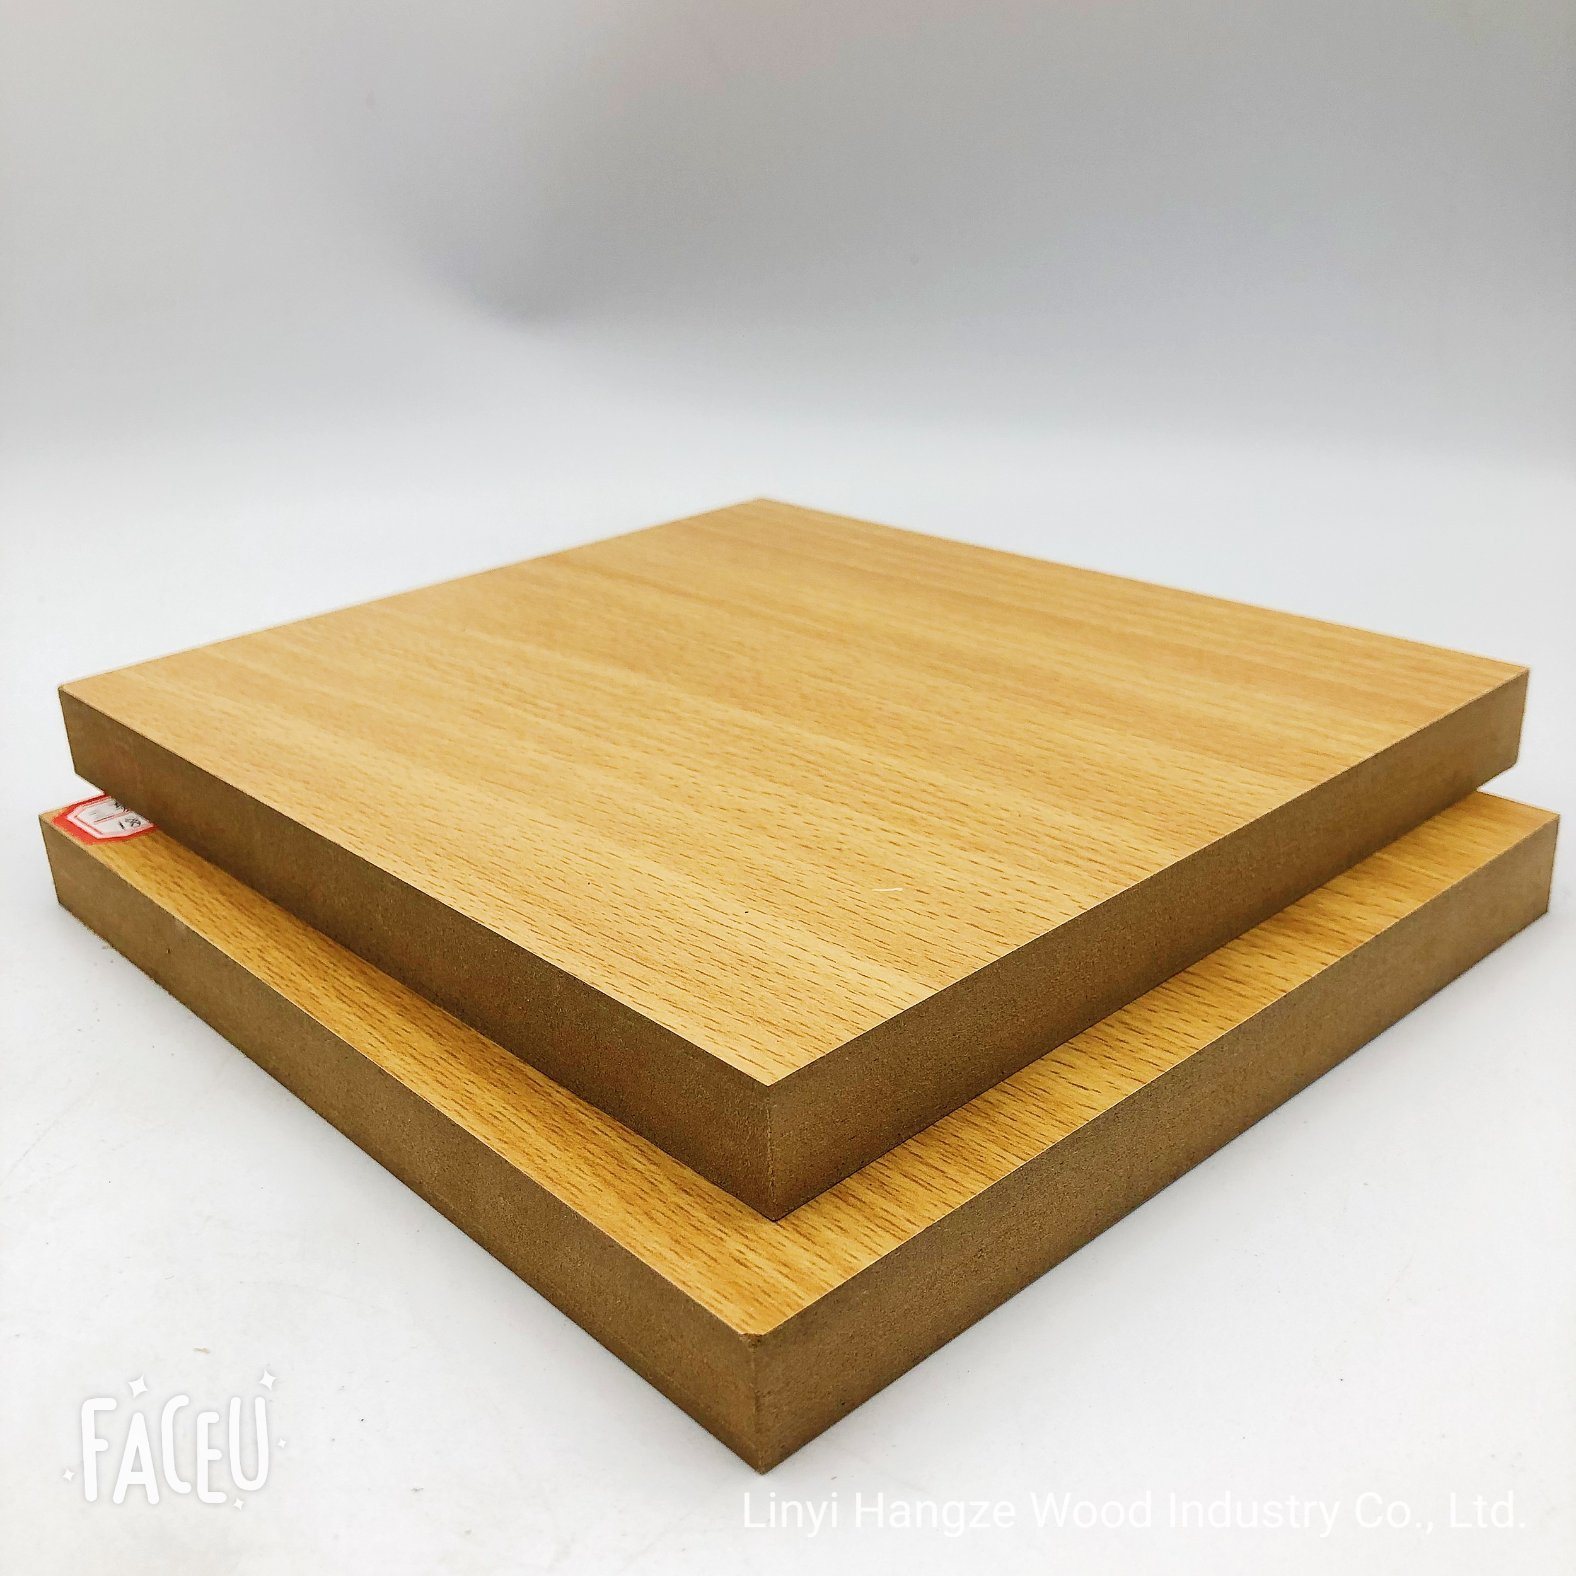 18mm 4X8 MDF with Melamine Film Sheet/Melamine Laminated MDF Board for Furniture and Kitchen Cabinet